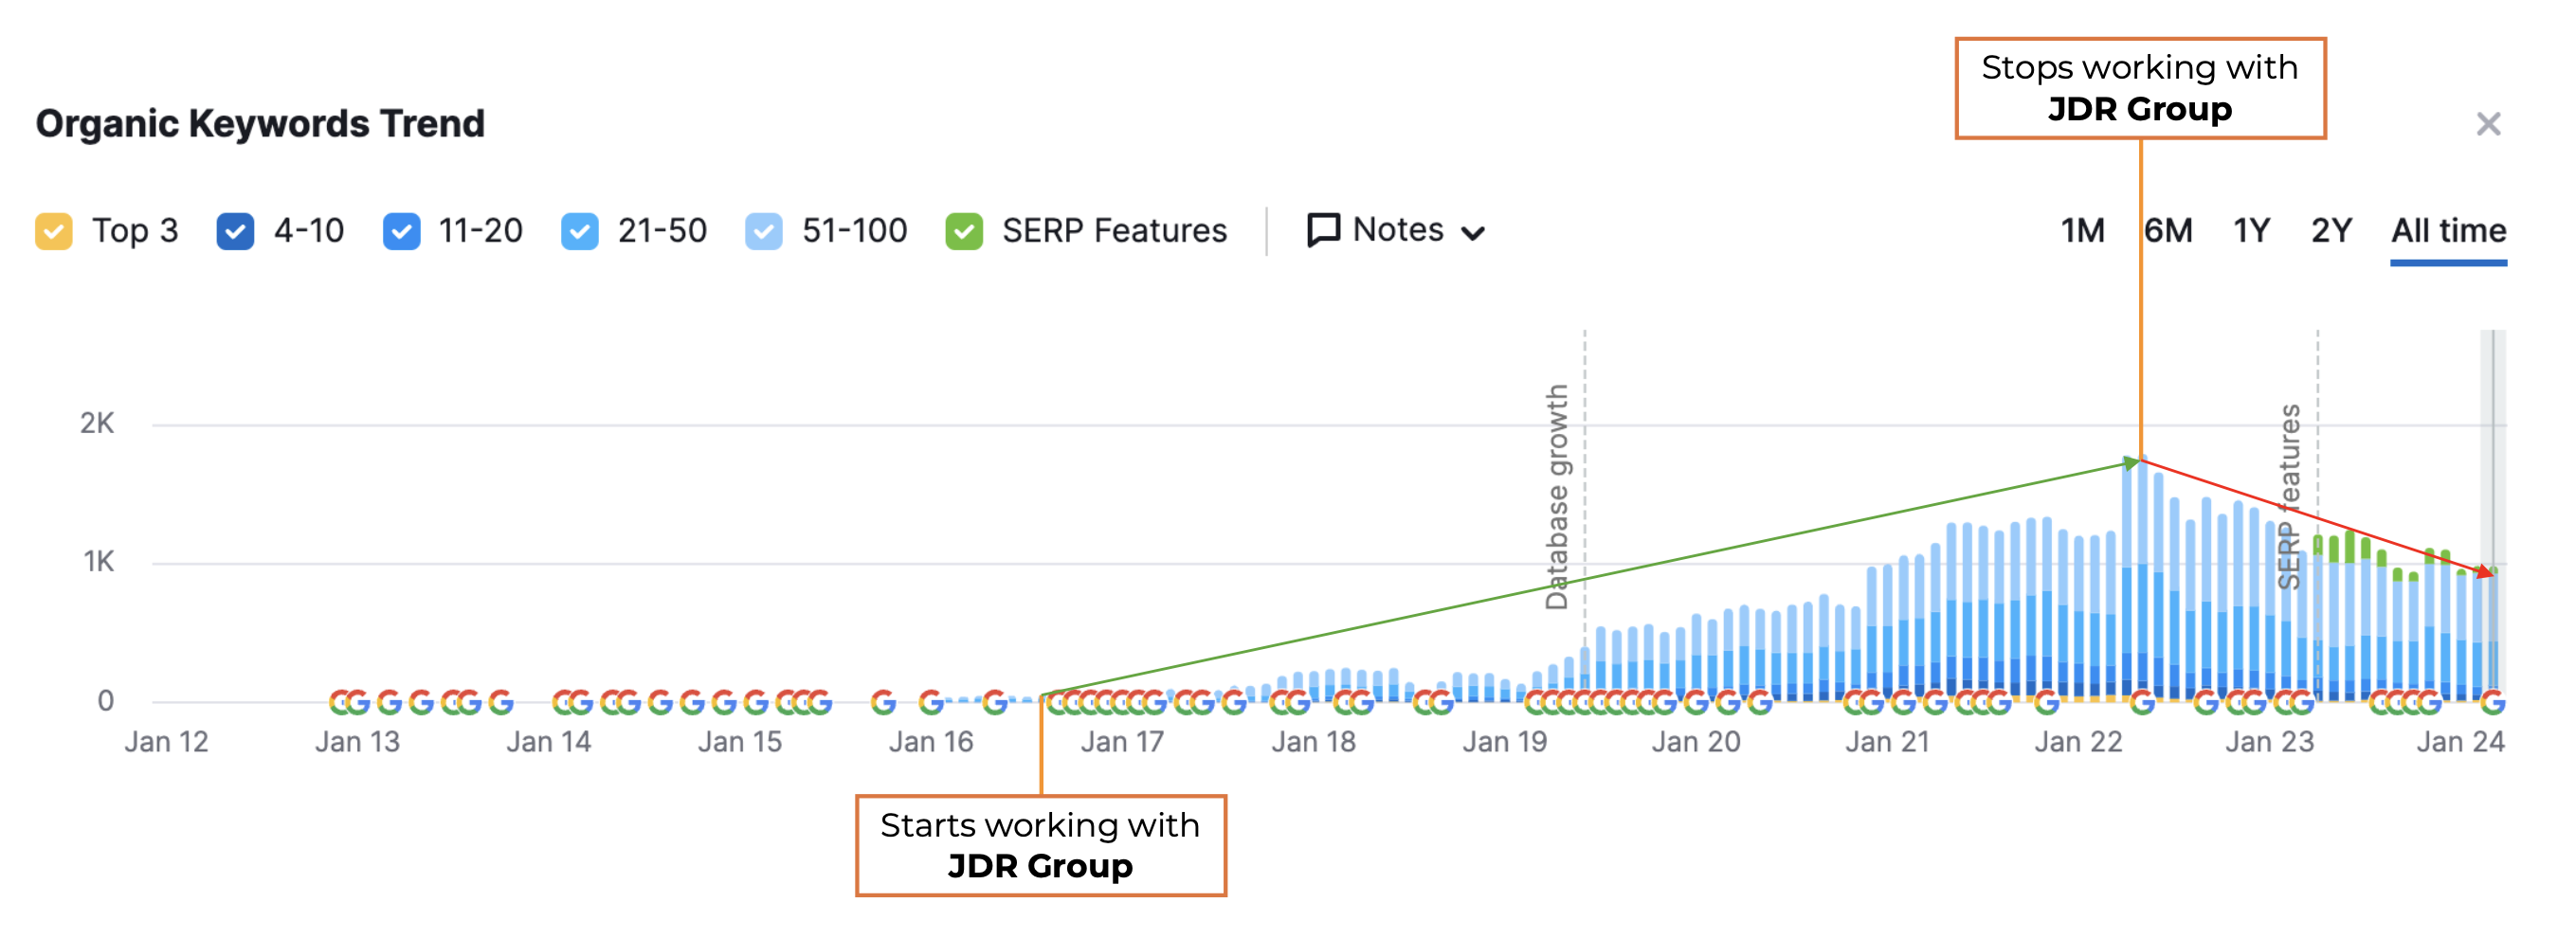 JDR Group Case Study - before and after stopping inbound marketing - 1